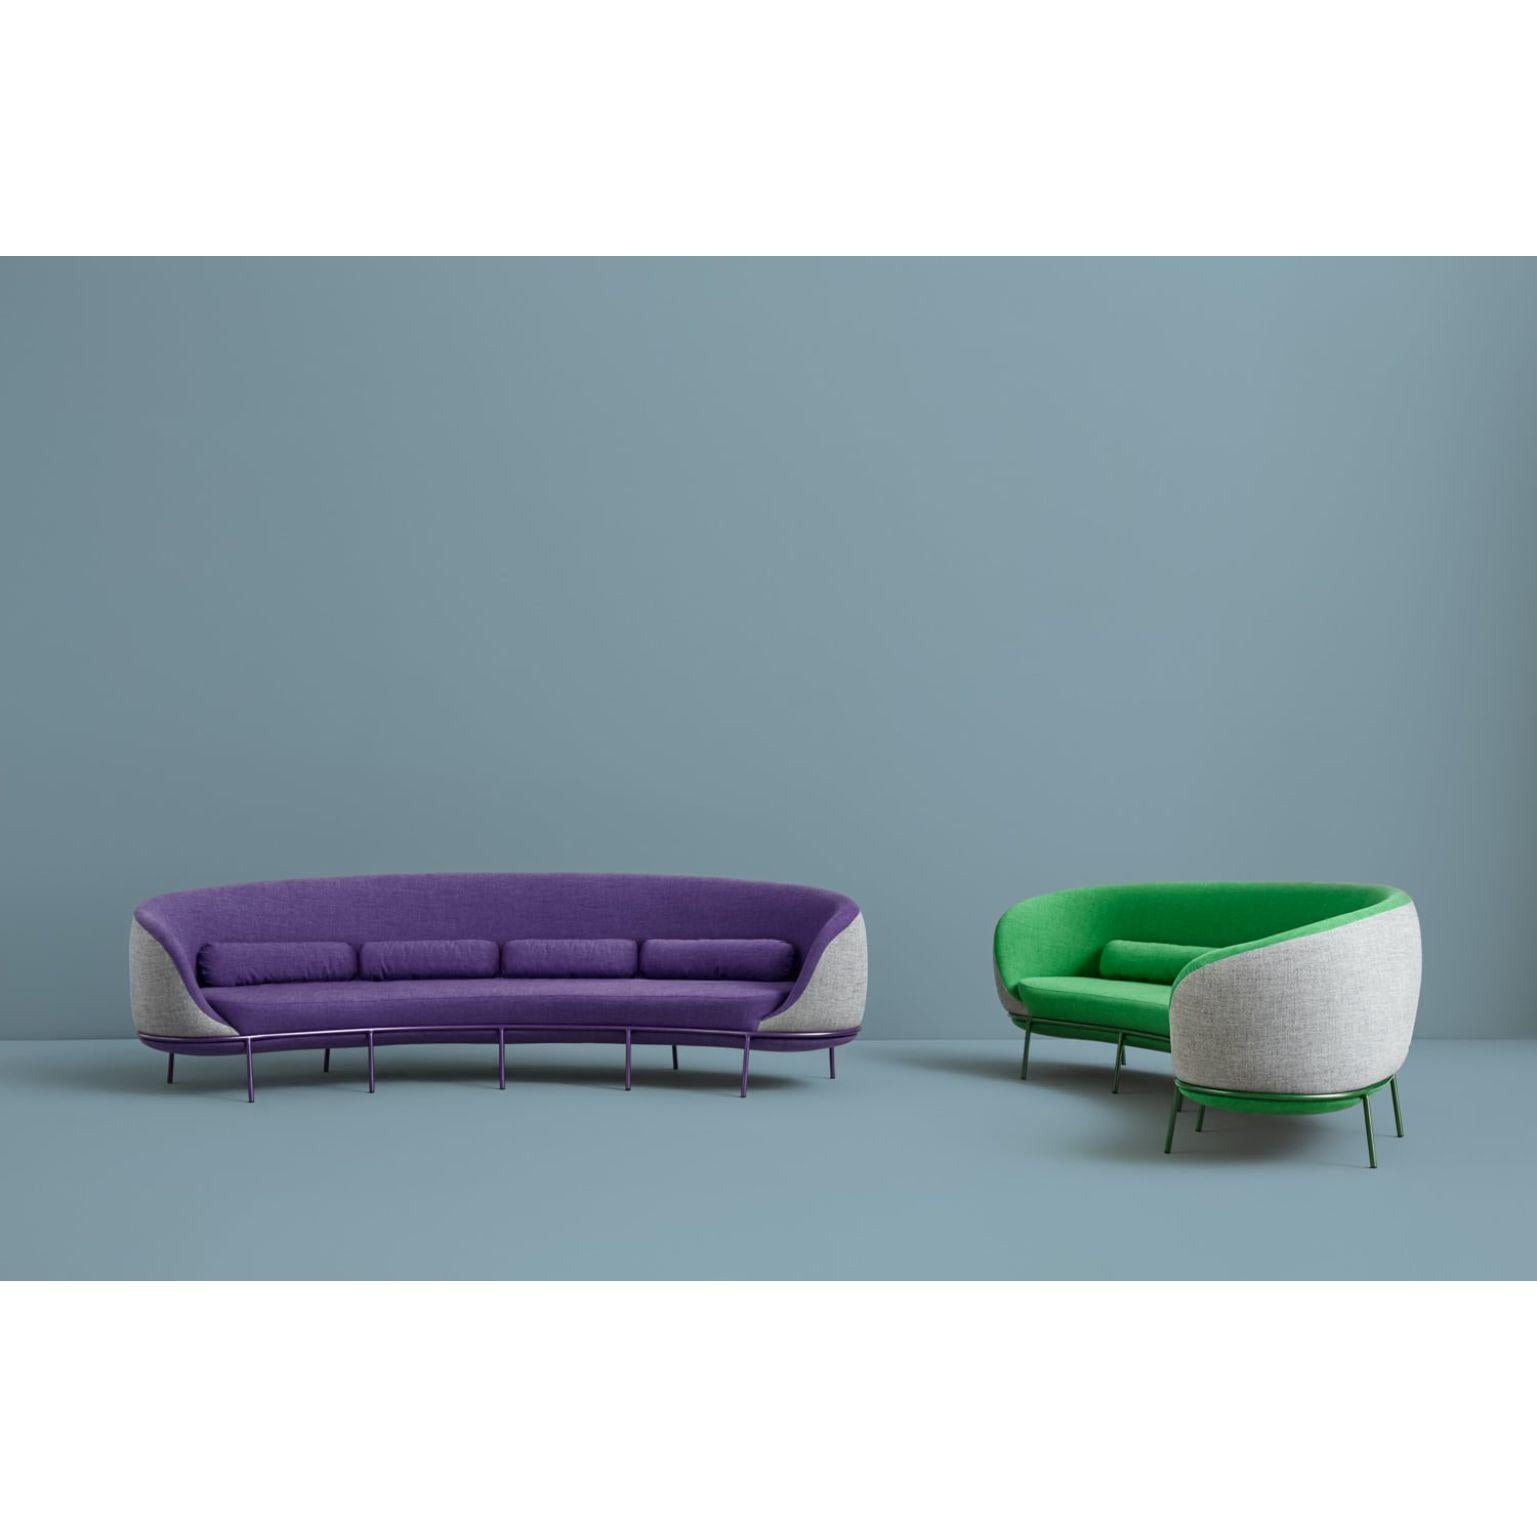 A set of purple & green nest sofa by Paula Rosales
Dimensions: W 340, D 110, H 80, Seat 41
Materials: Iron structure and MDF board
Foam CMHR (high resilience and flame retardant) for all our cushion filling systems
Painted or chromed